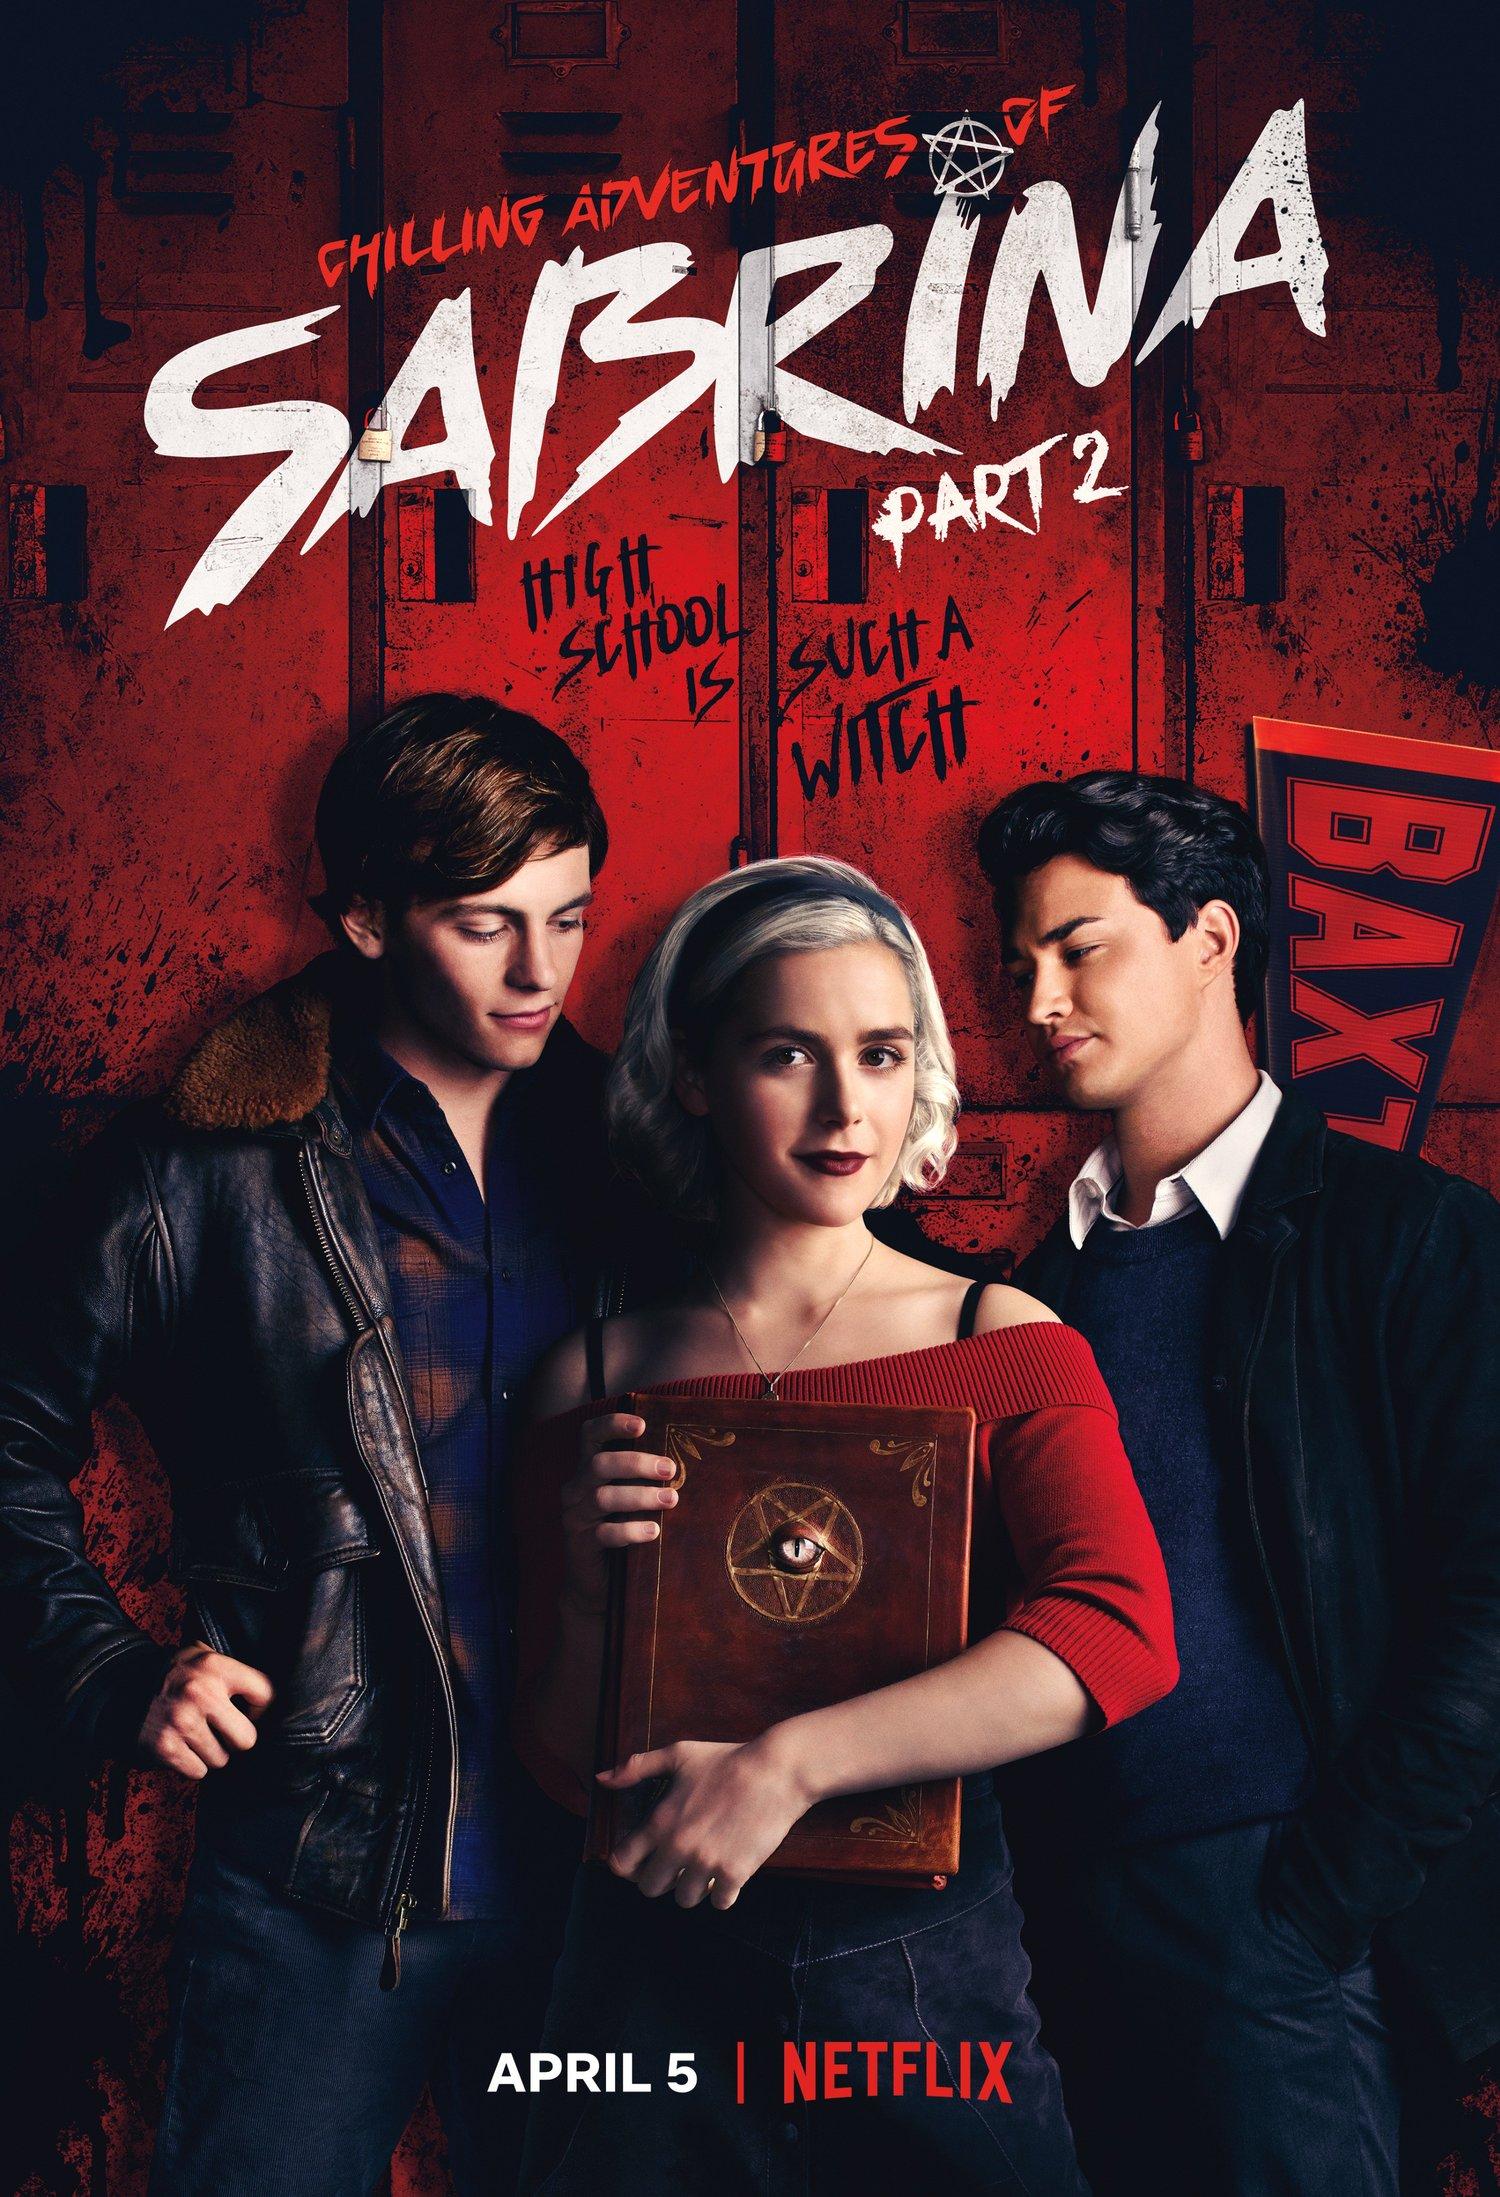 New Poster for Netflix's CHILLING ADVENTURES OF SABRINA Part